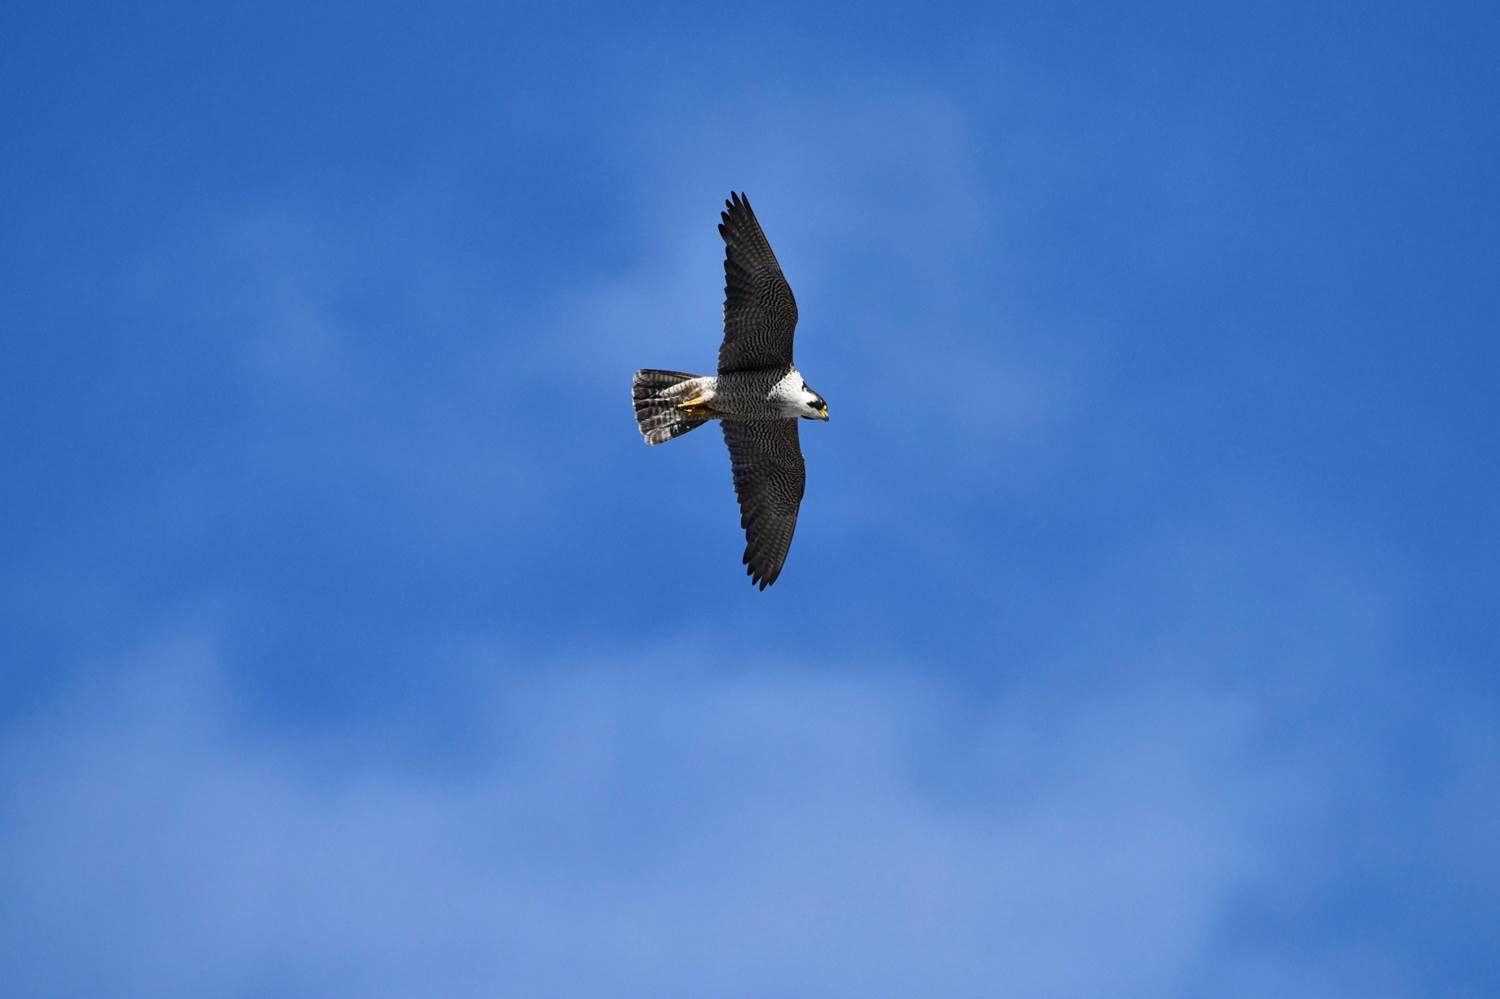 A hawk flying in the sky

Description automatically generated